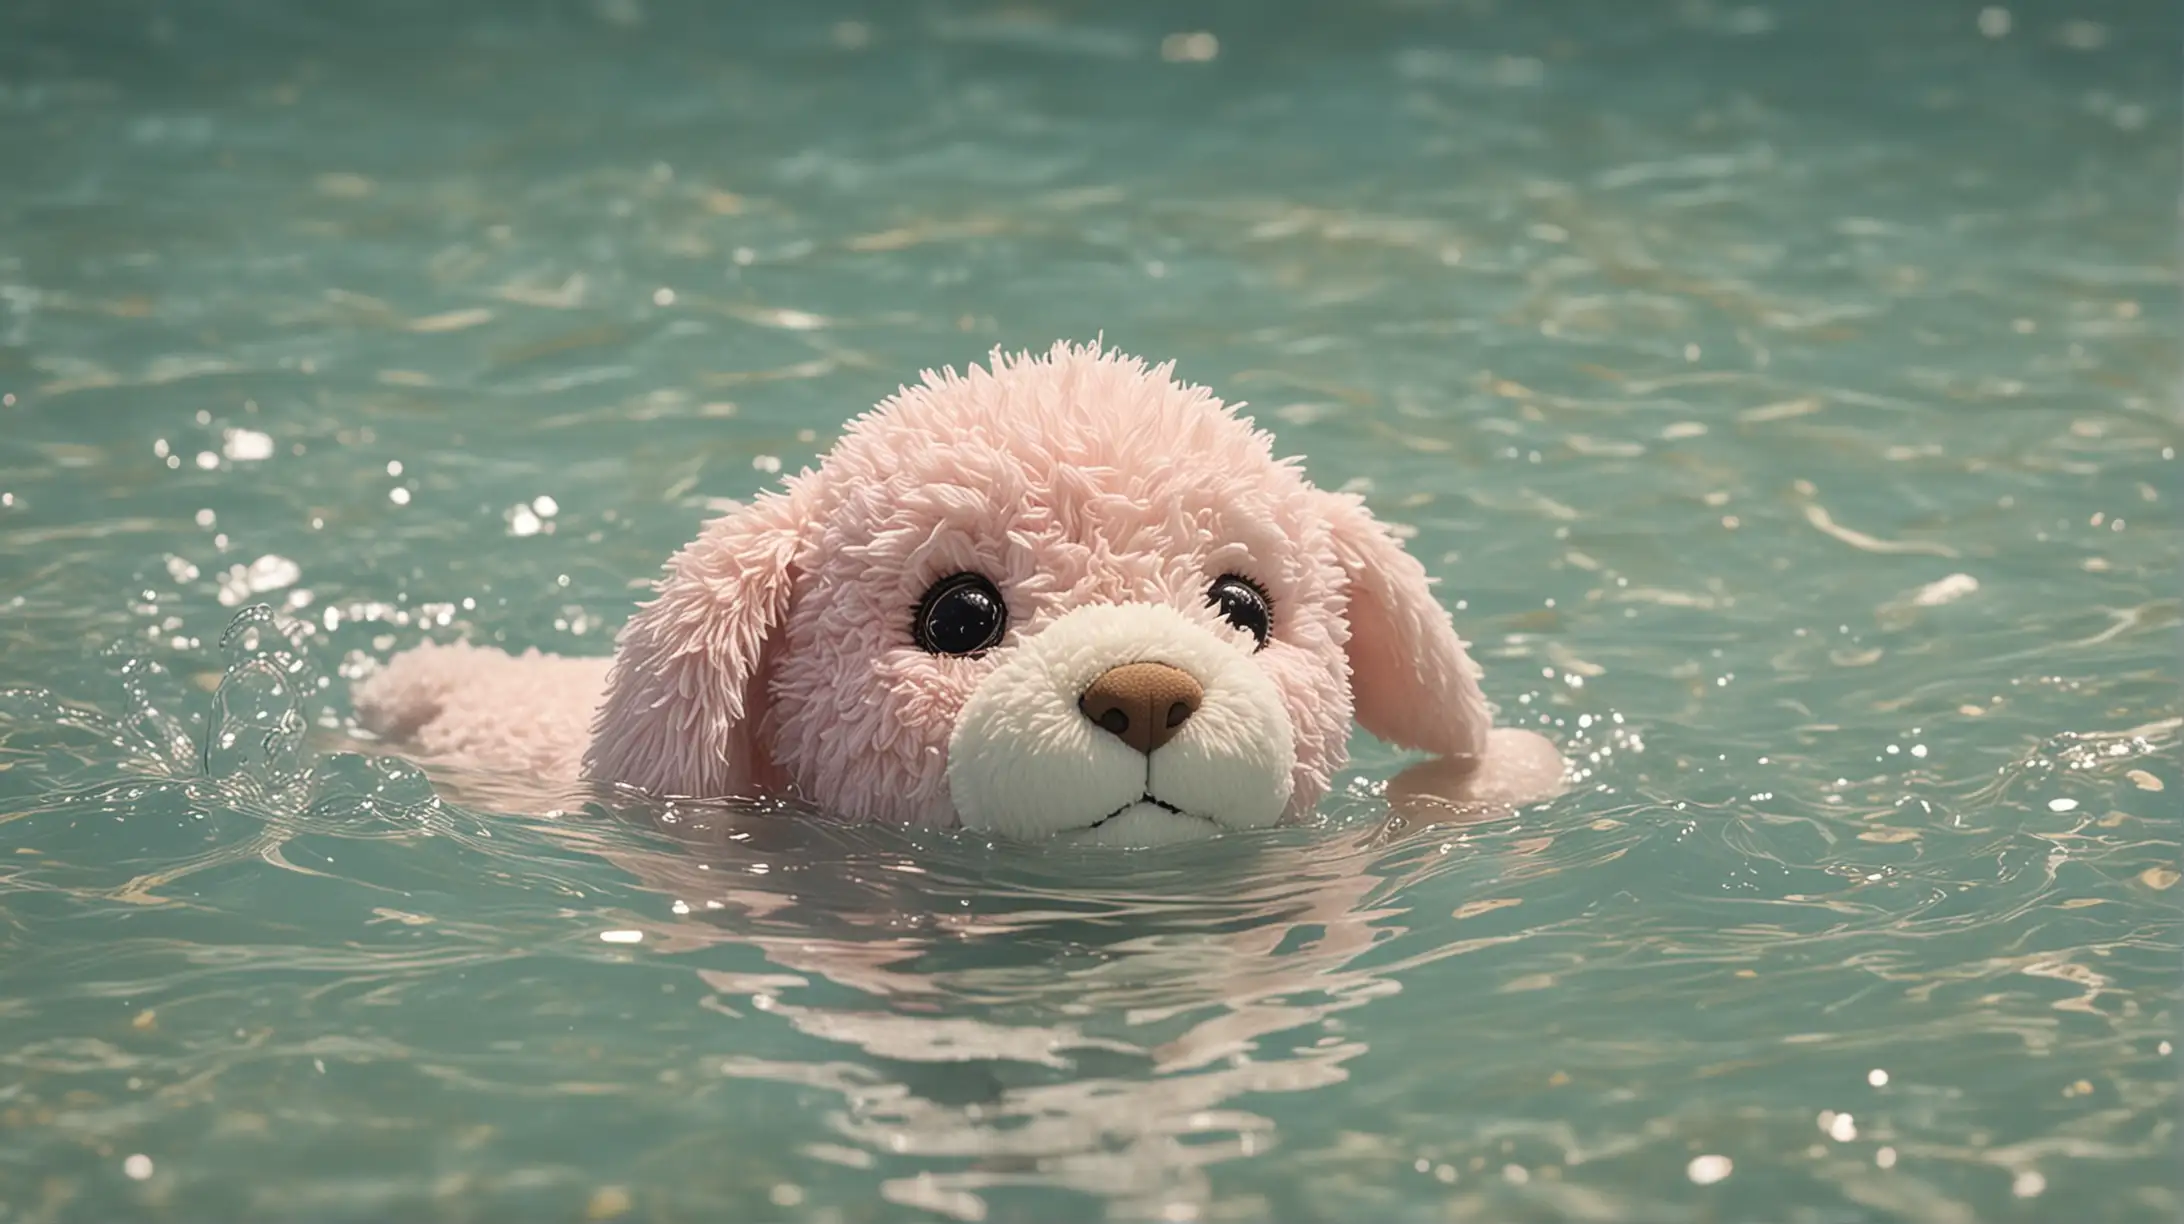 Pastel Stuffed Animal Swimming in Tranquil Waters